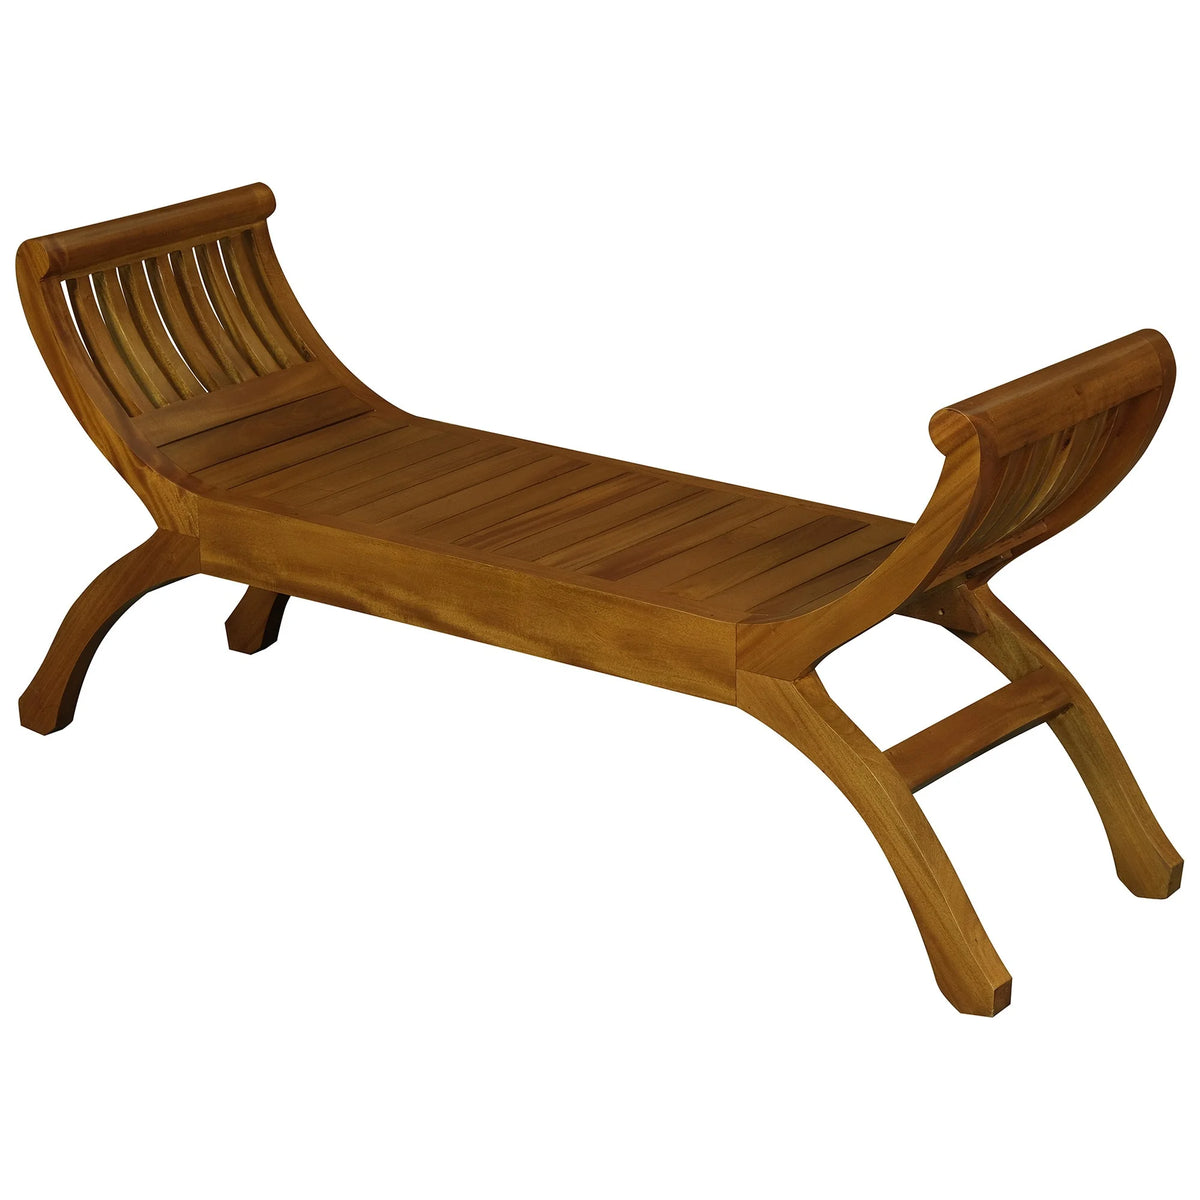 Maeve Timber 2 Seater Curved Bench - Light Pecan